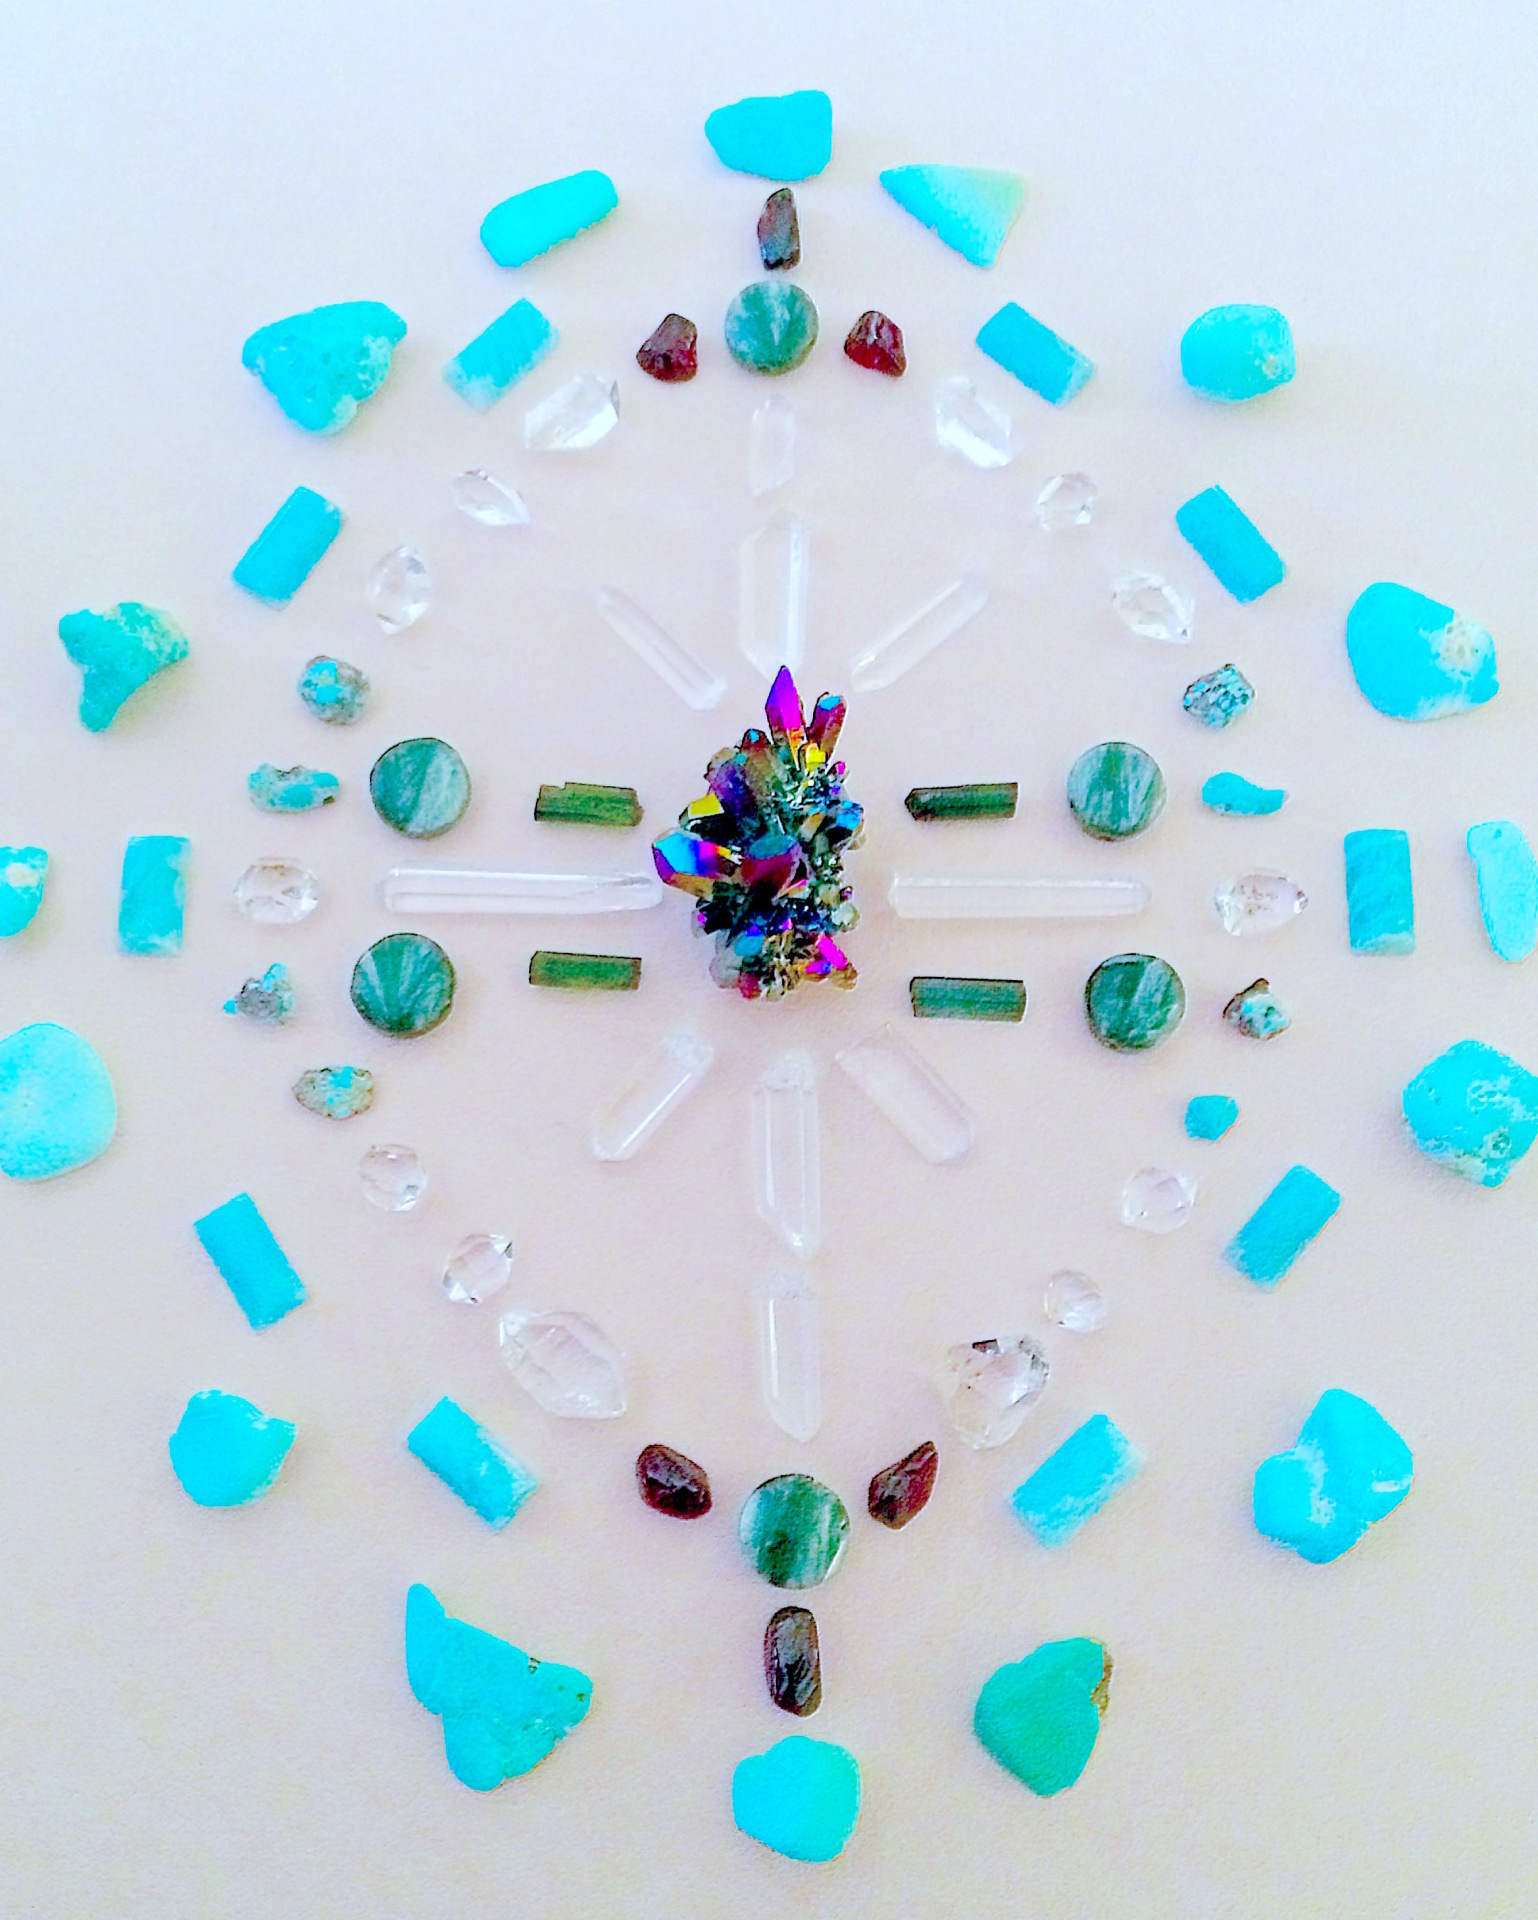 Crystal Grid dedicated for Happiness